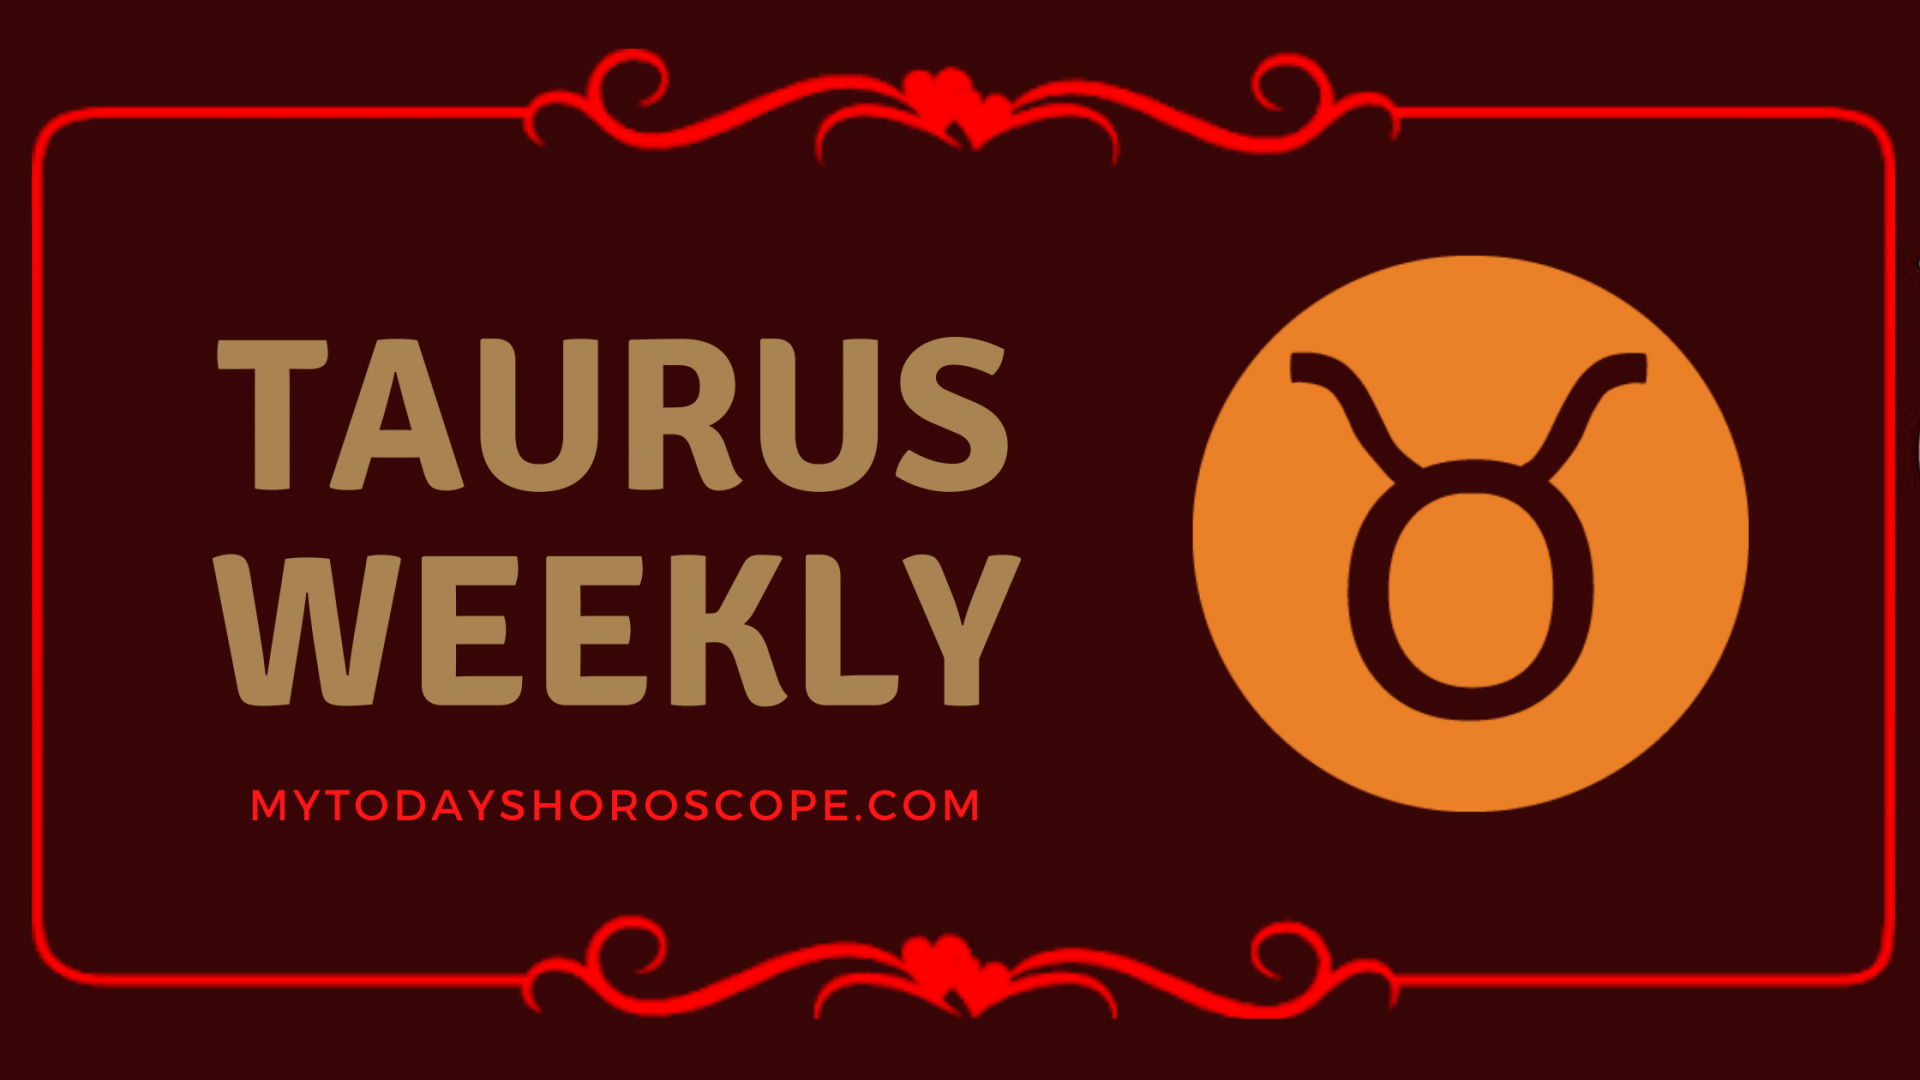 TAURUS Weekly Horoscope 9 to 15 August 2021: Predictions for Love, Financial, Health and Career